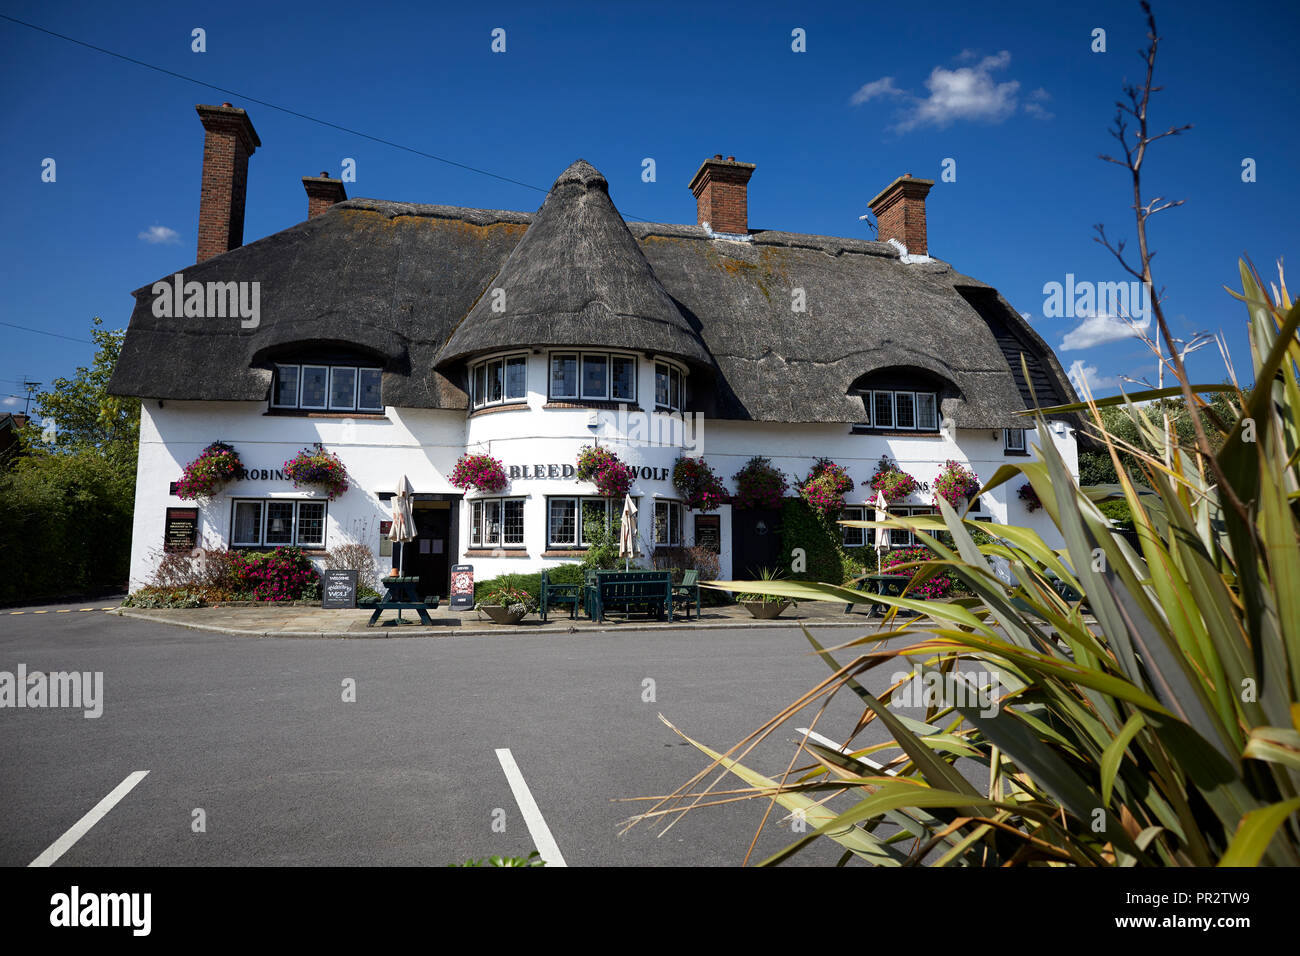 Grade II listed public house vernacular revival style picturesque thatched roofed country pub Bleeding Wolf in Scholar Green, Cheshire  Robinsons Brew Stock Photo